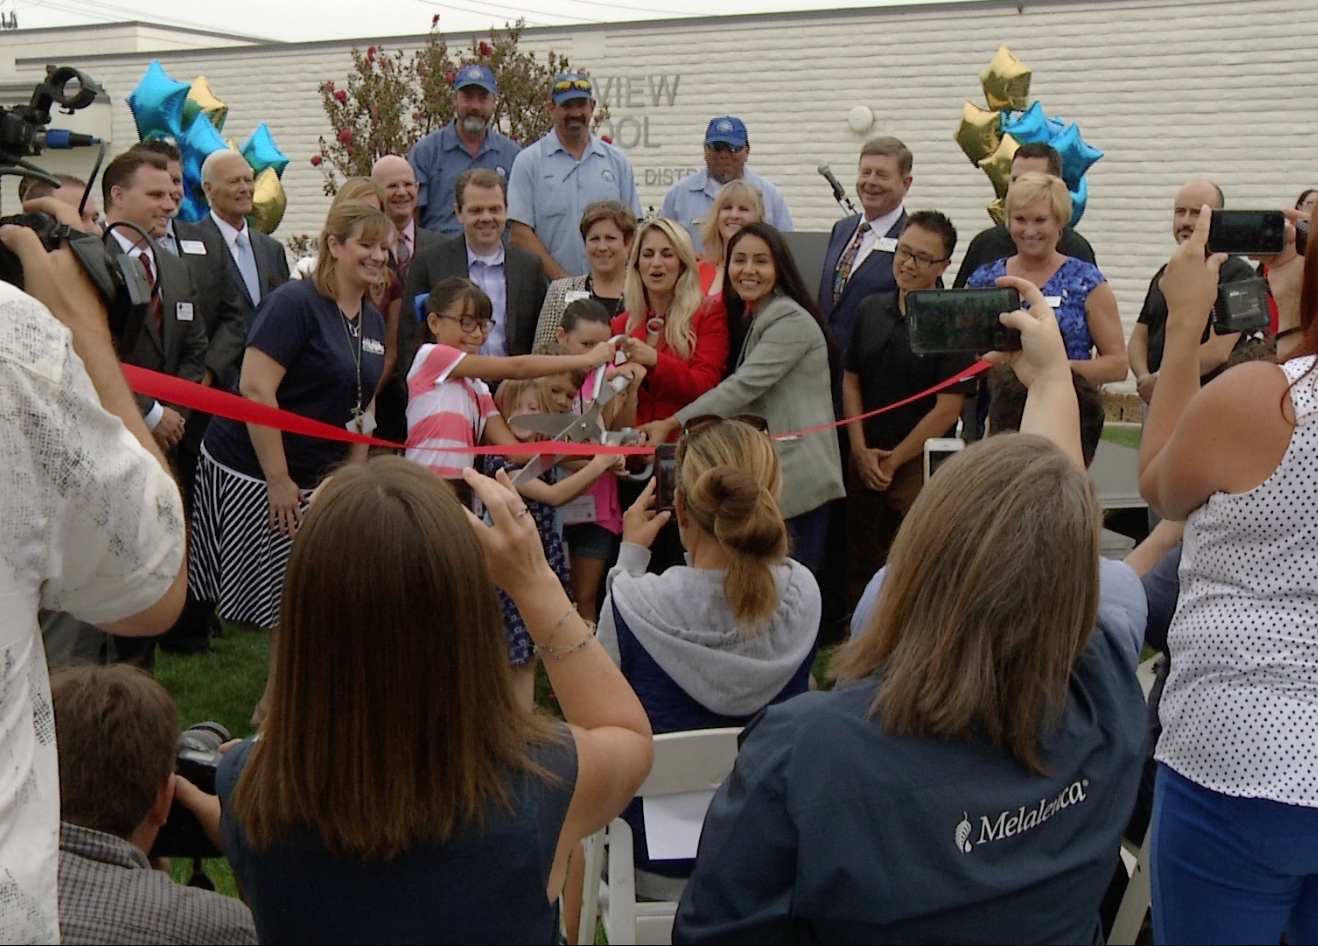 An image showing participants cutting ribbon during the reopening of Lake View Elementary School